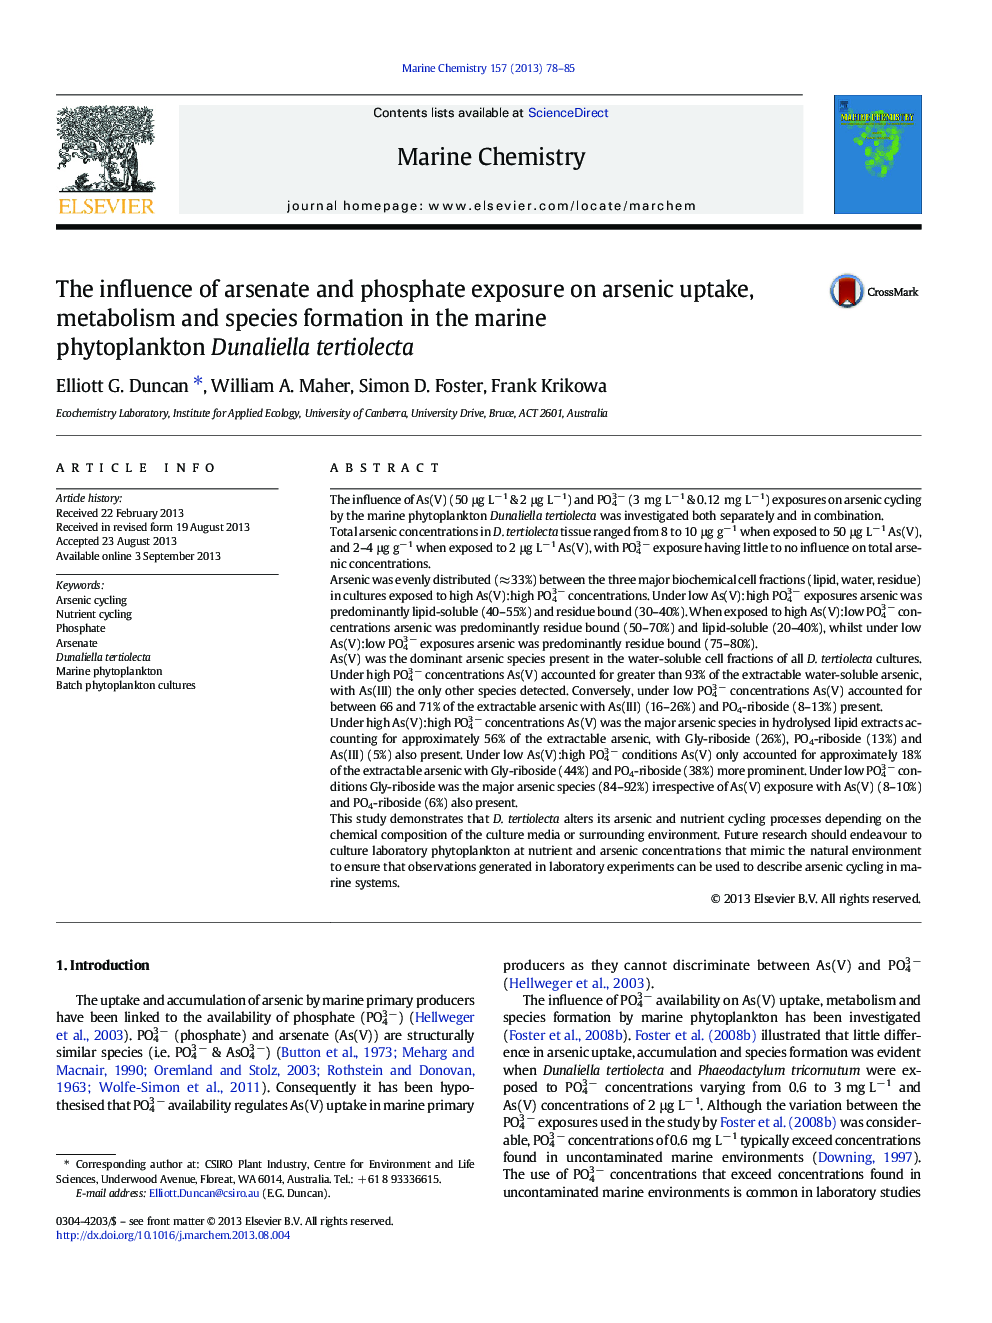 The influence of arsenate and phosphate exposure on arsenic uptake, metabolism and species formation in the marine phytoplankton Dunaliella tertiolecta